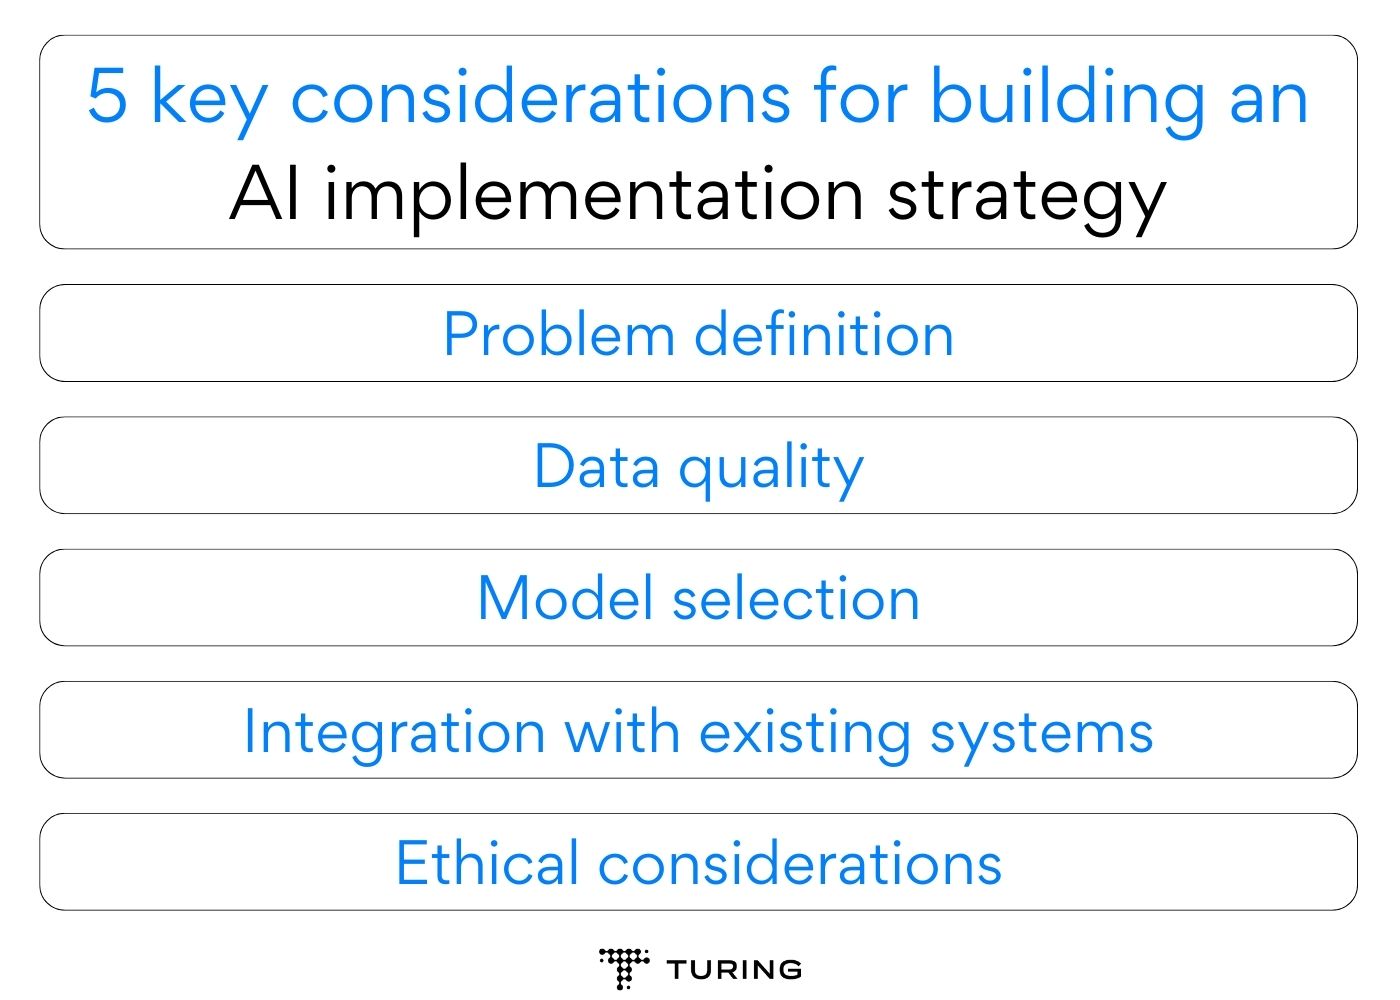 5 key considerations for building an AI implementation strategy